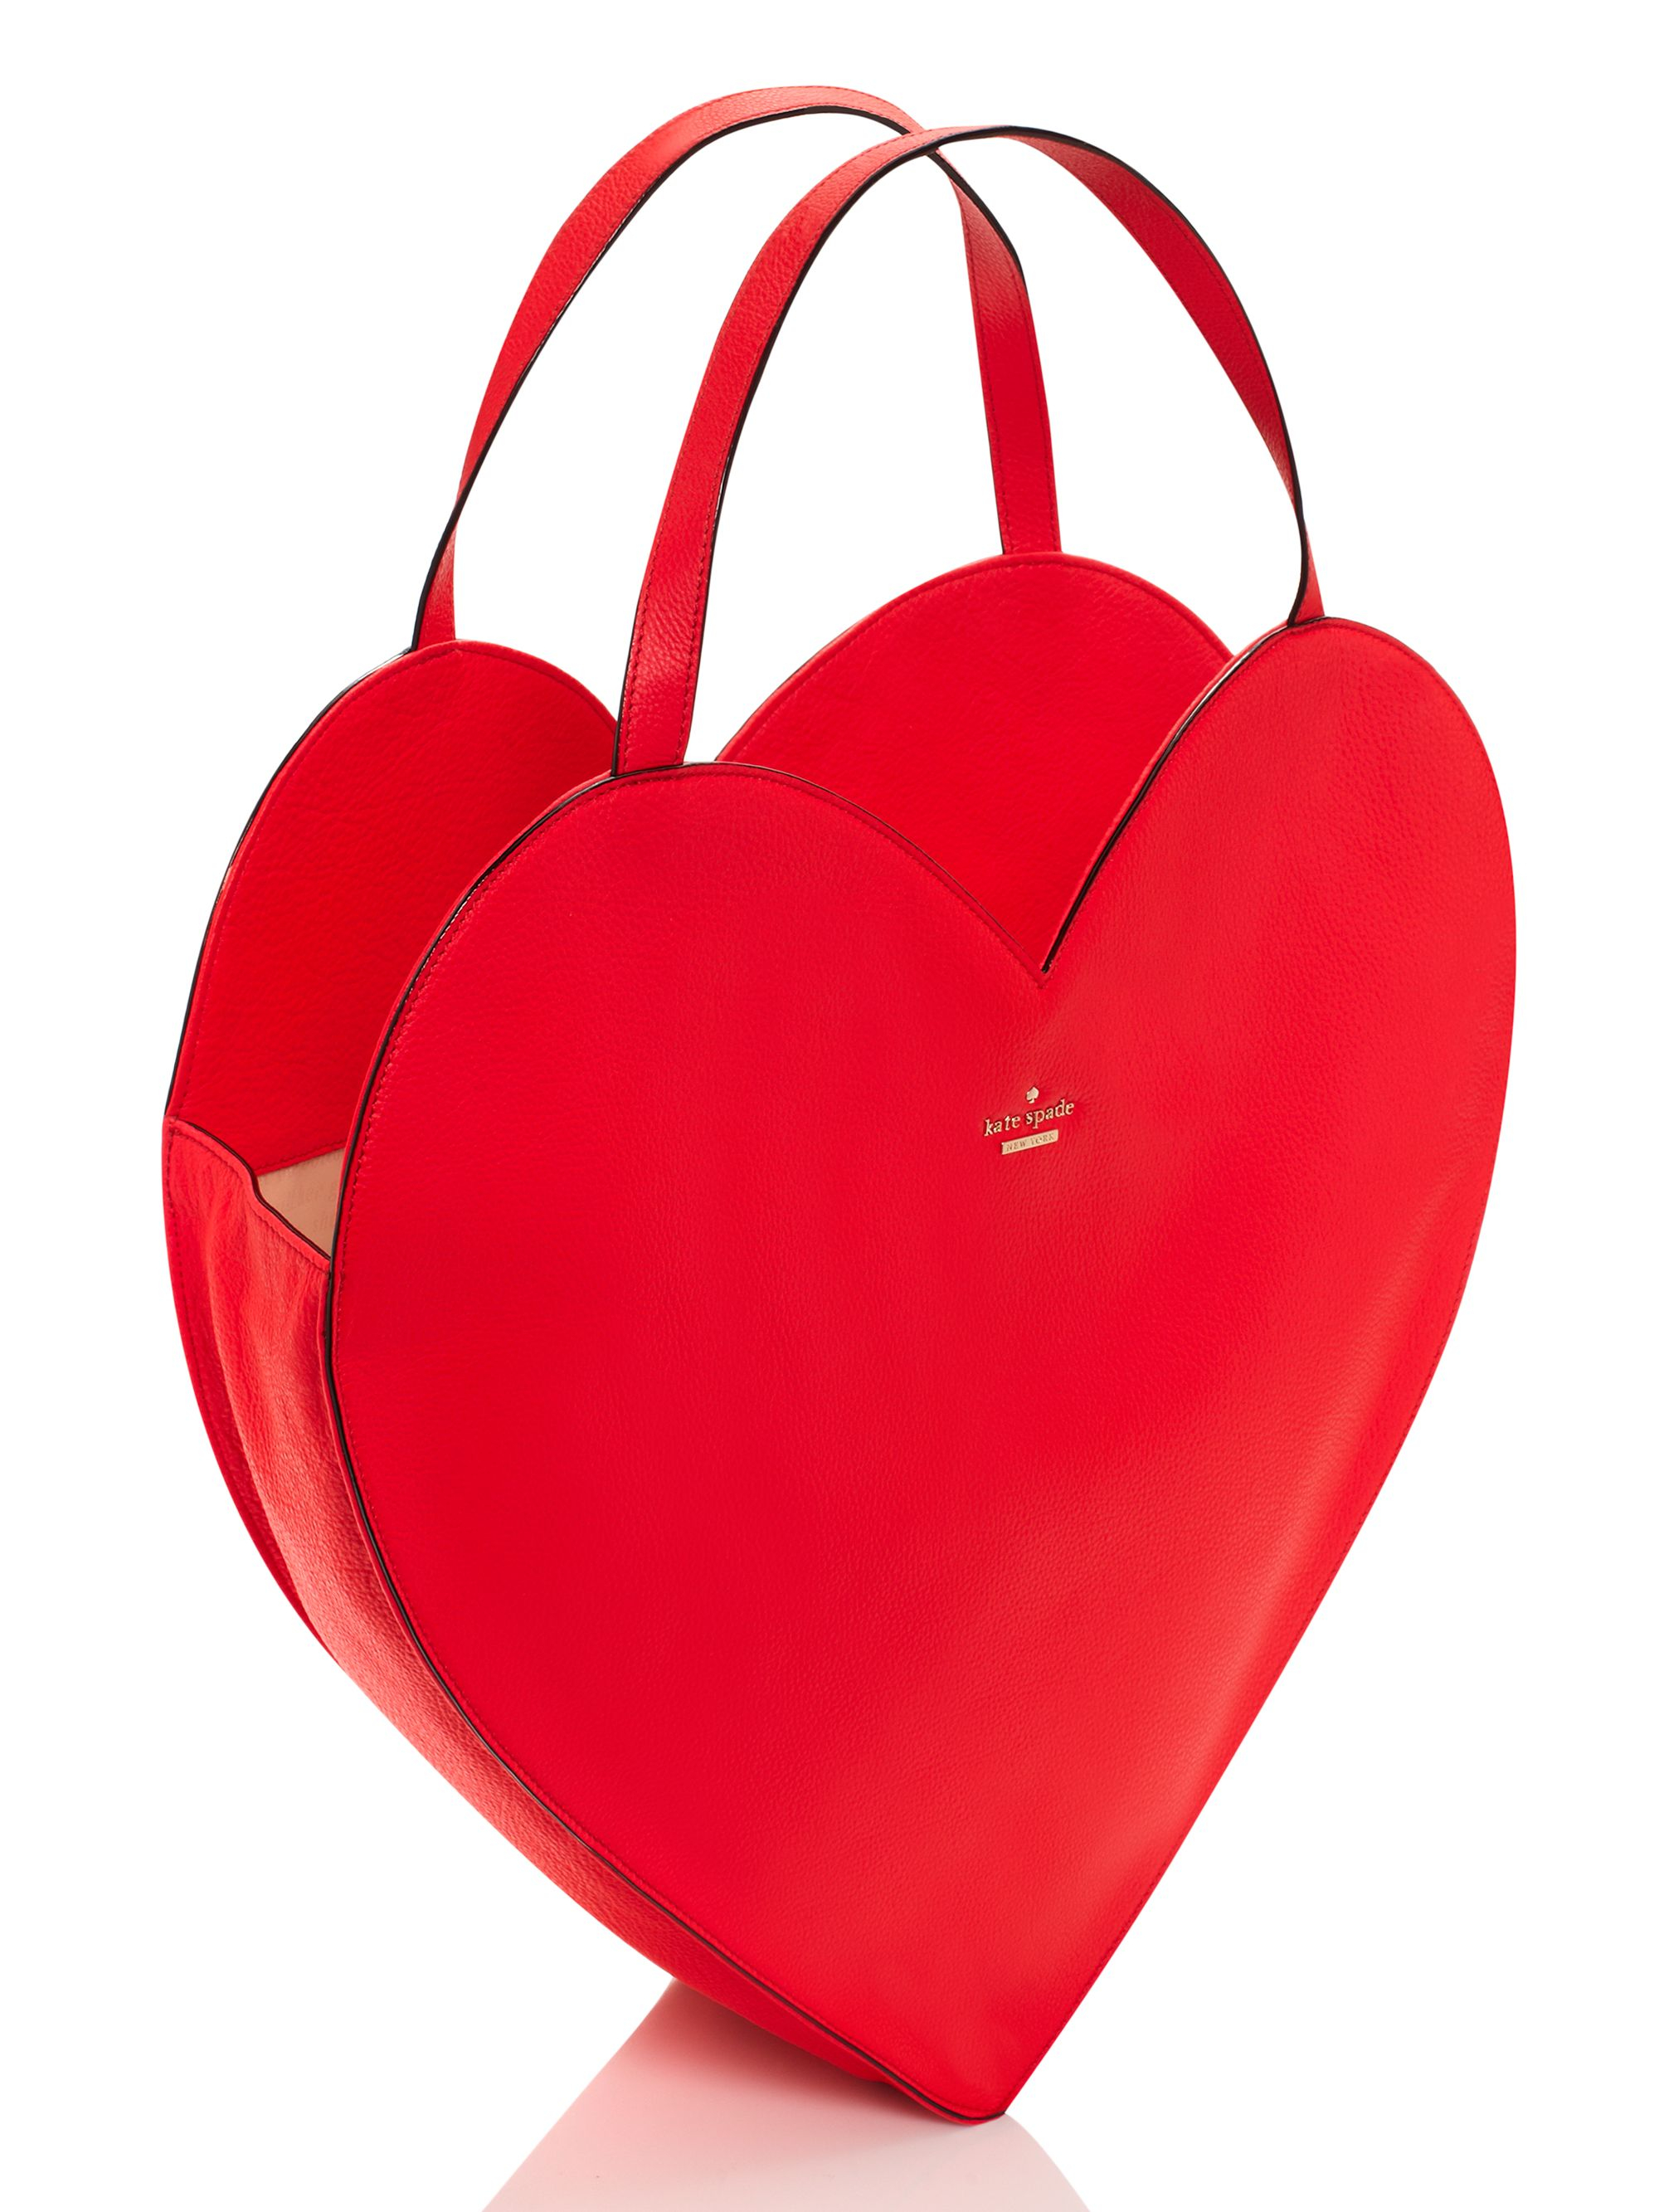 Kate spade new york Love Birds Heart Tote in Red | Lyst